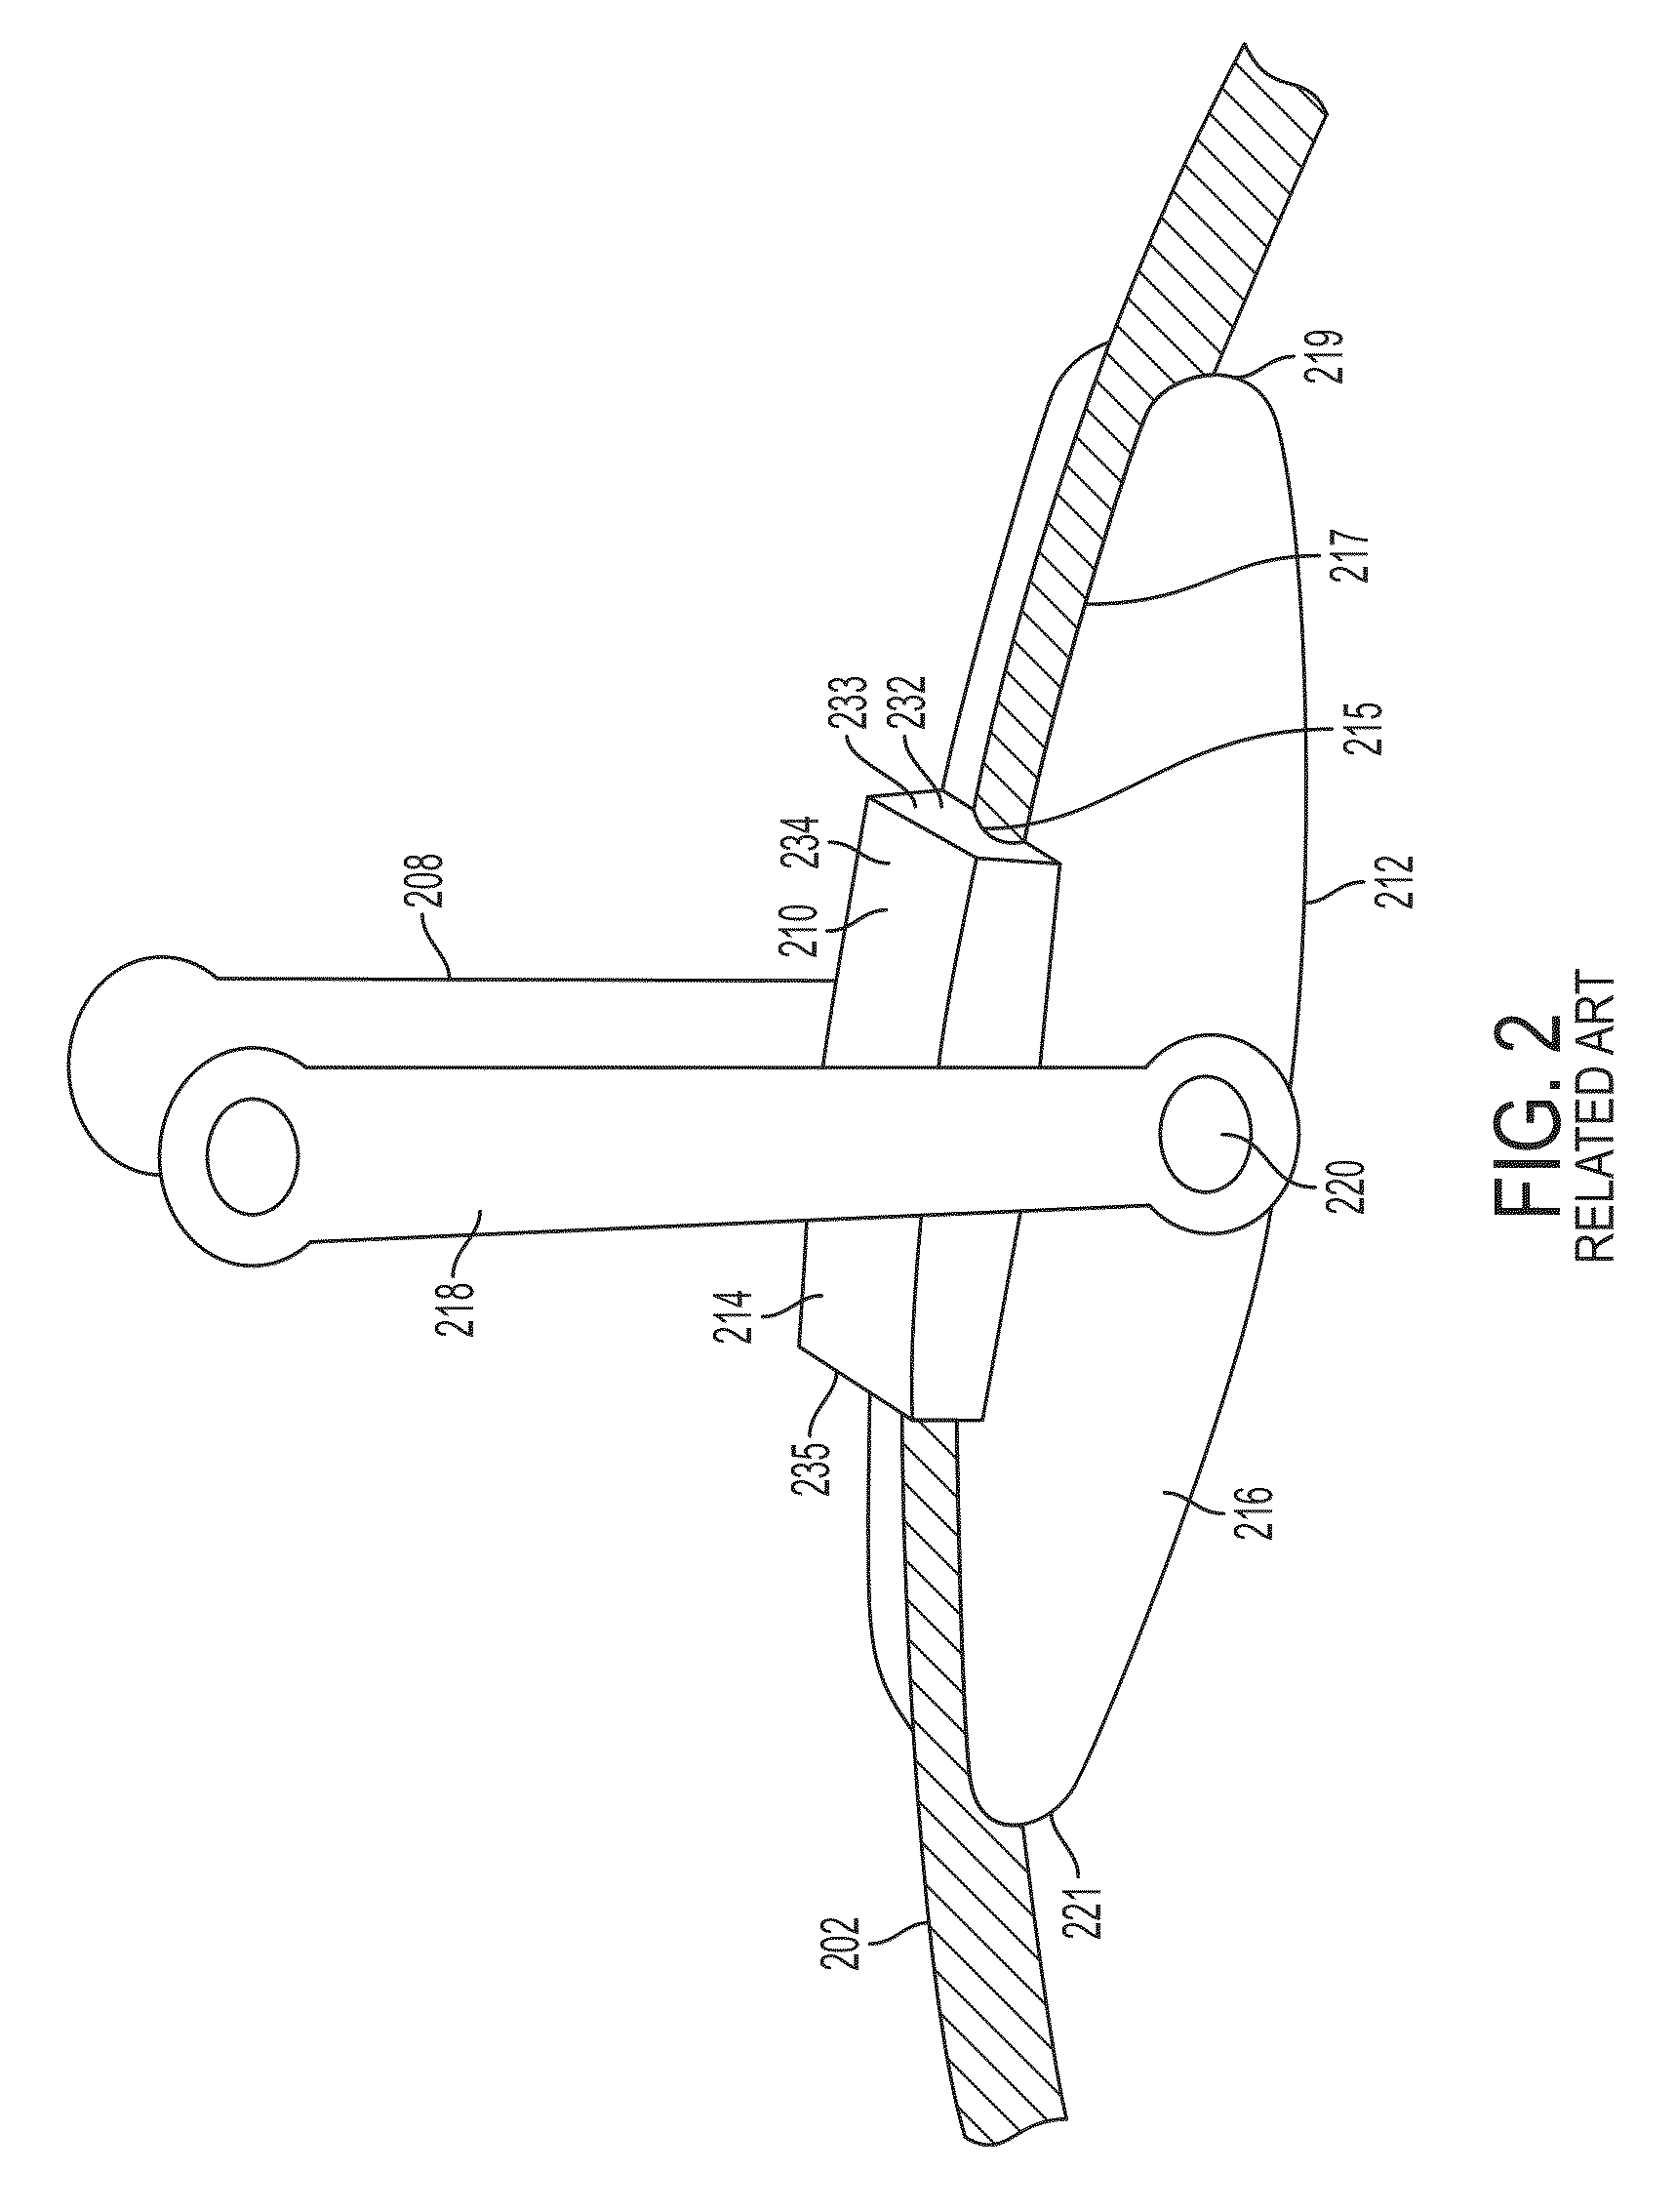 Apparatuses, systems and methods for determining effective wind speed